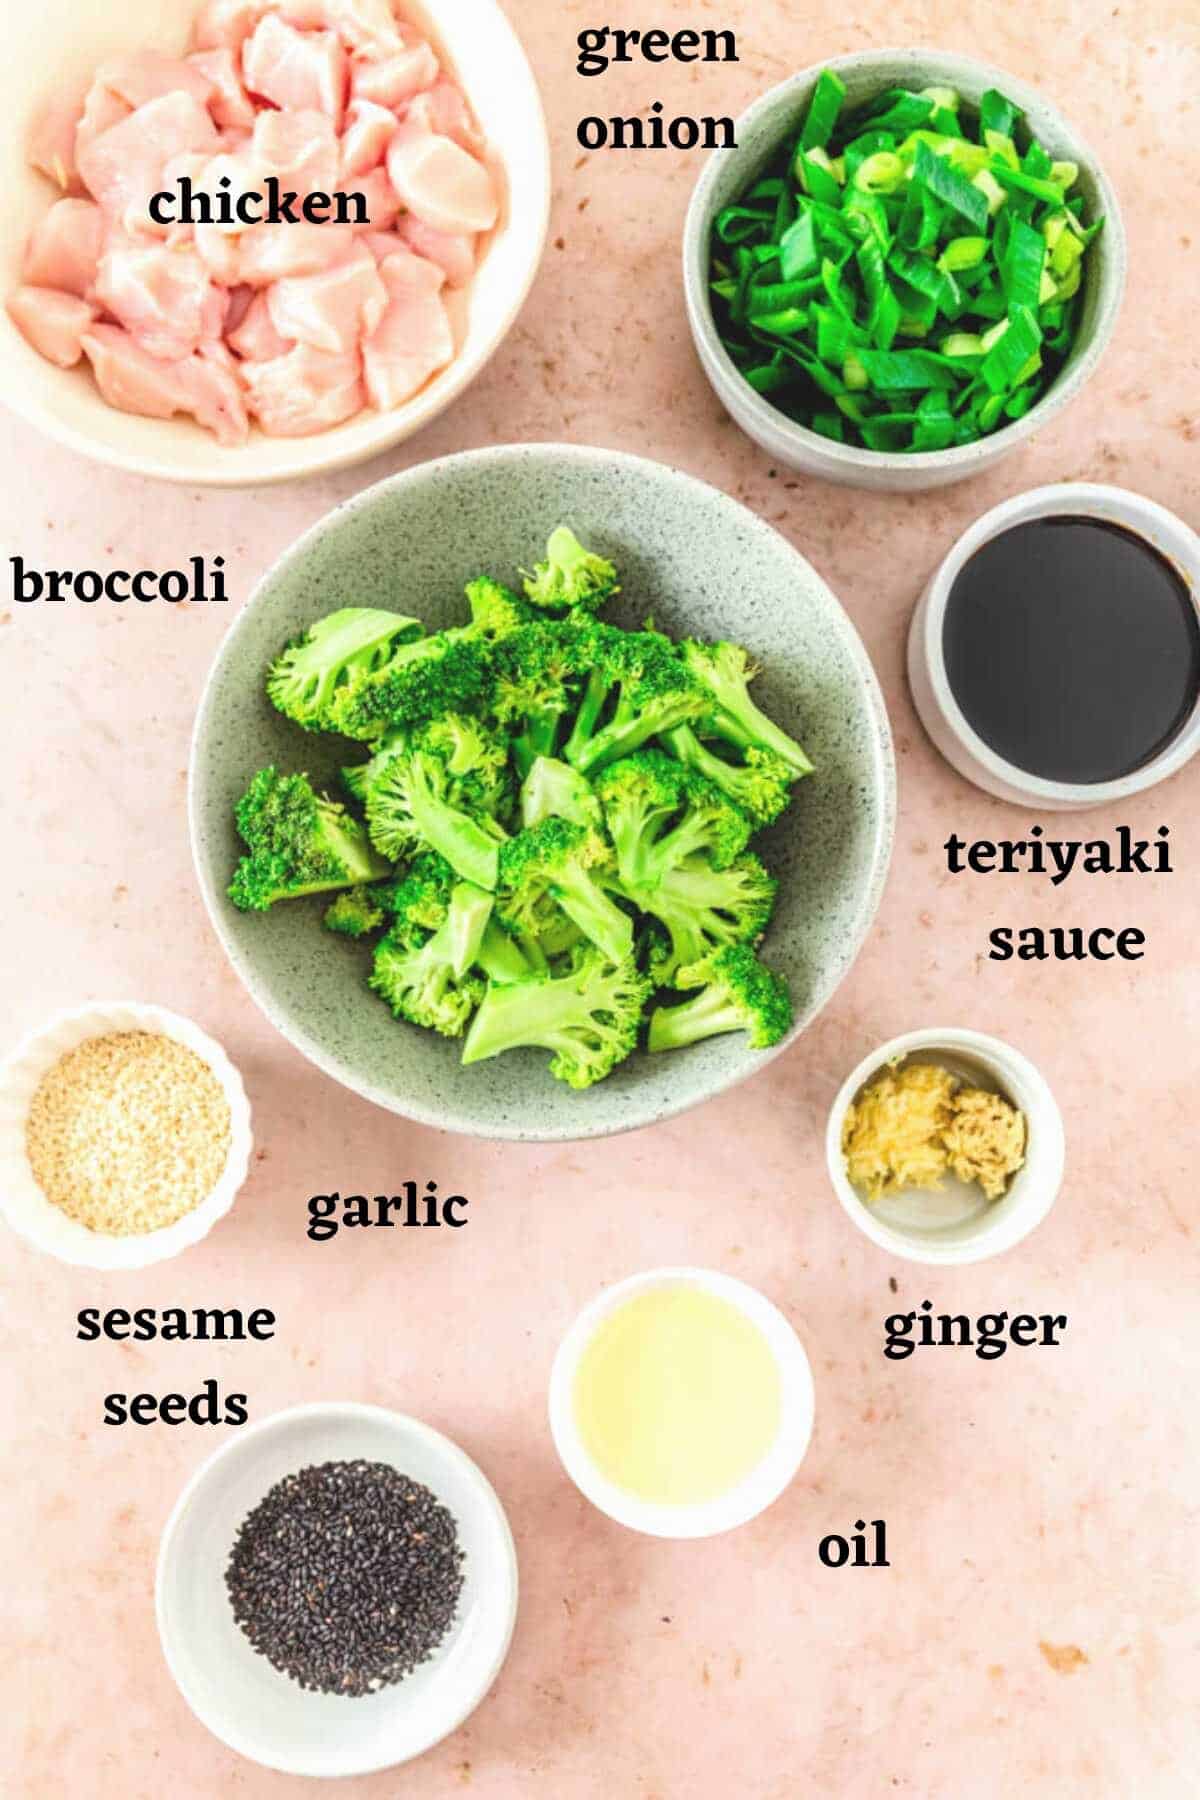 Ingredients to make Easy Chicken Teriyaki with Broccoli.